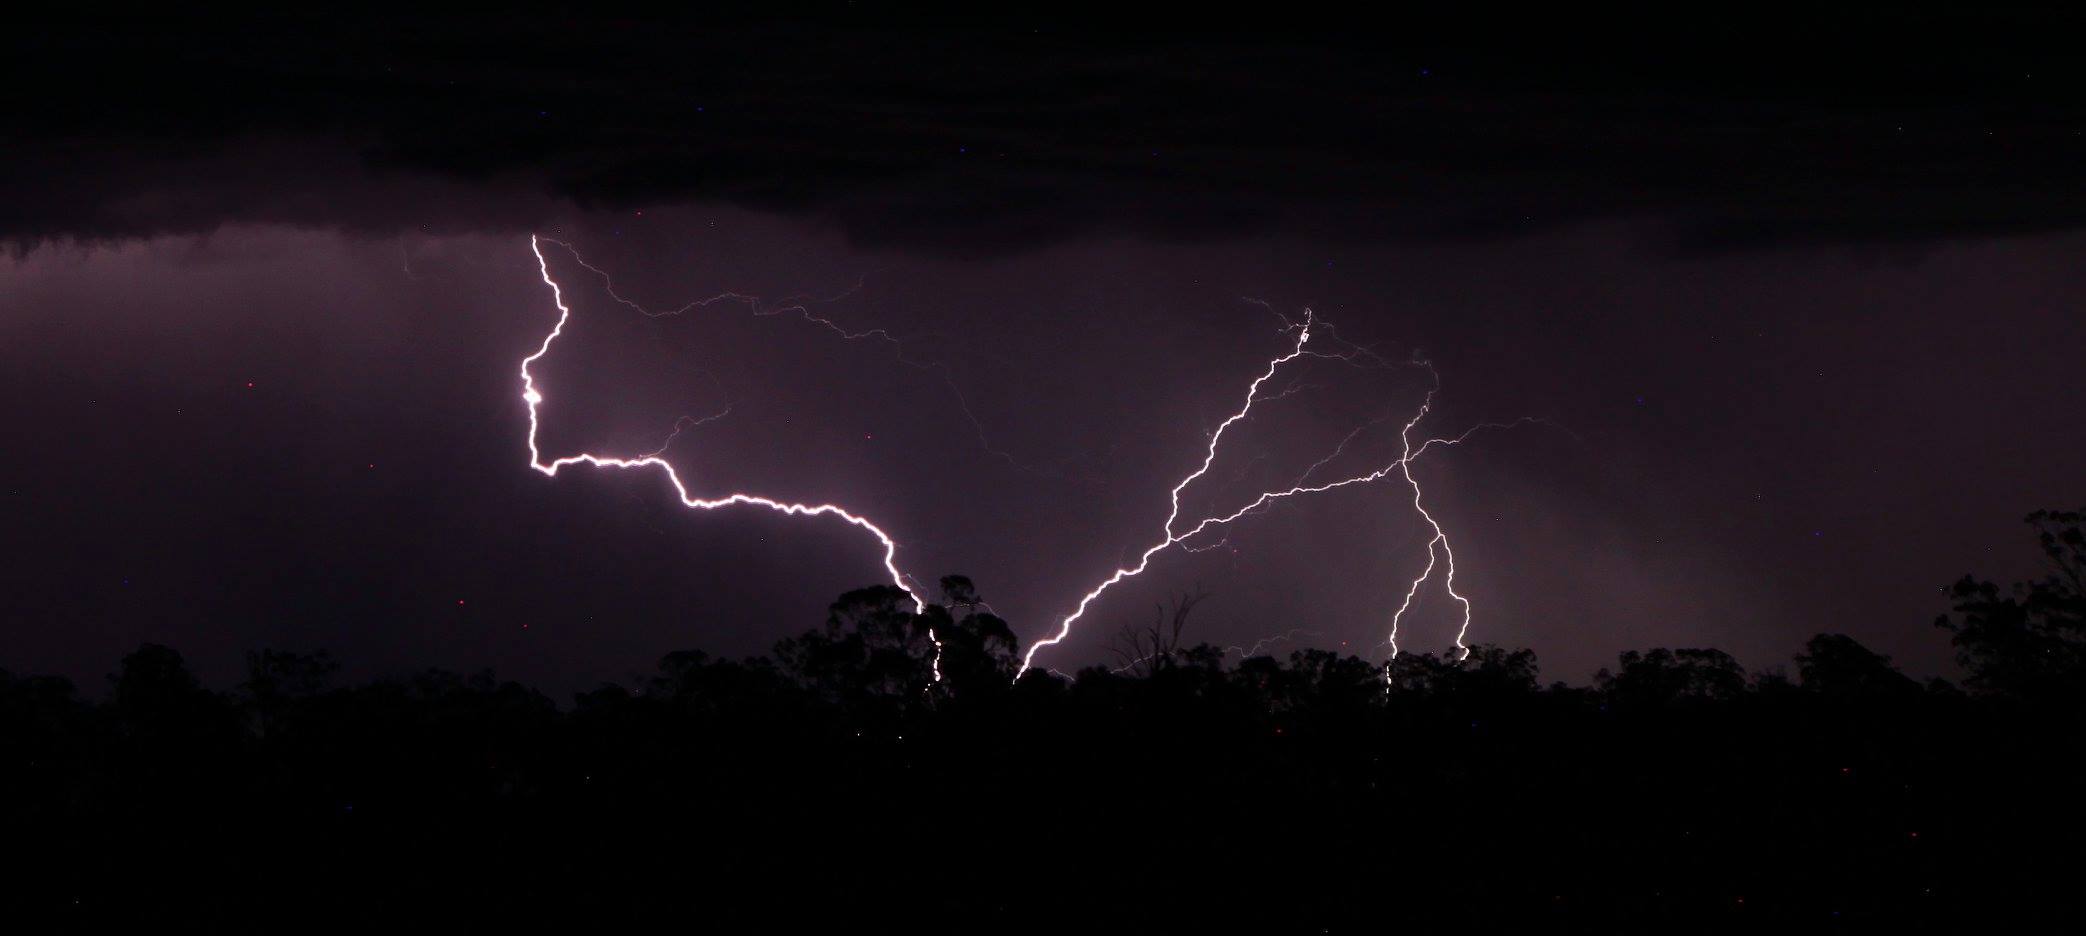 Storms and Lightning Warwick Queensland 21st December 2016 - Extreme Storms2086 x 936